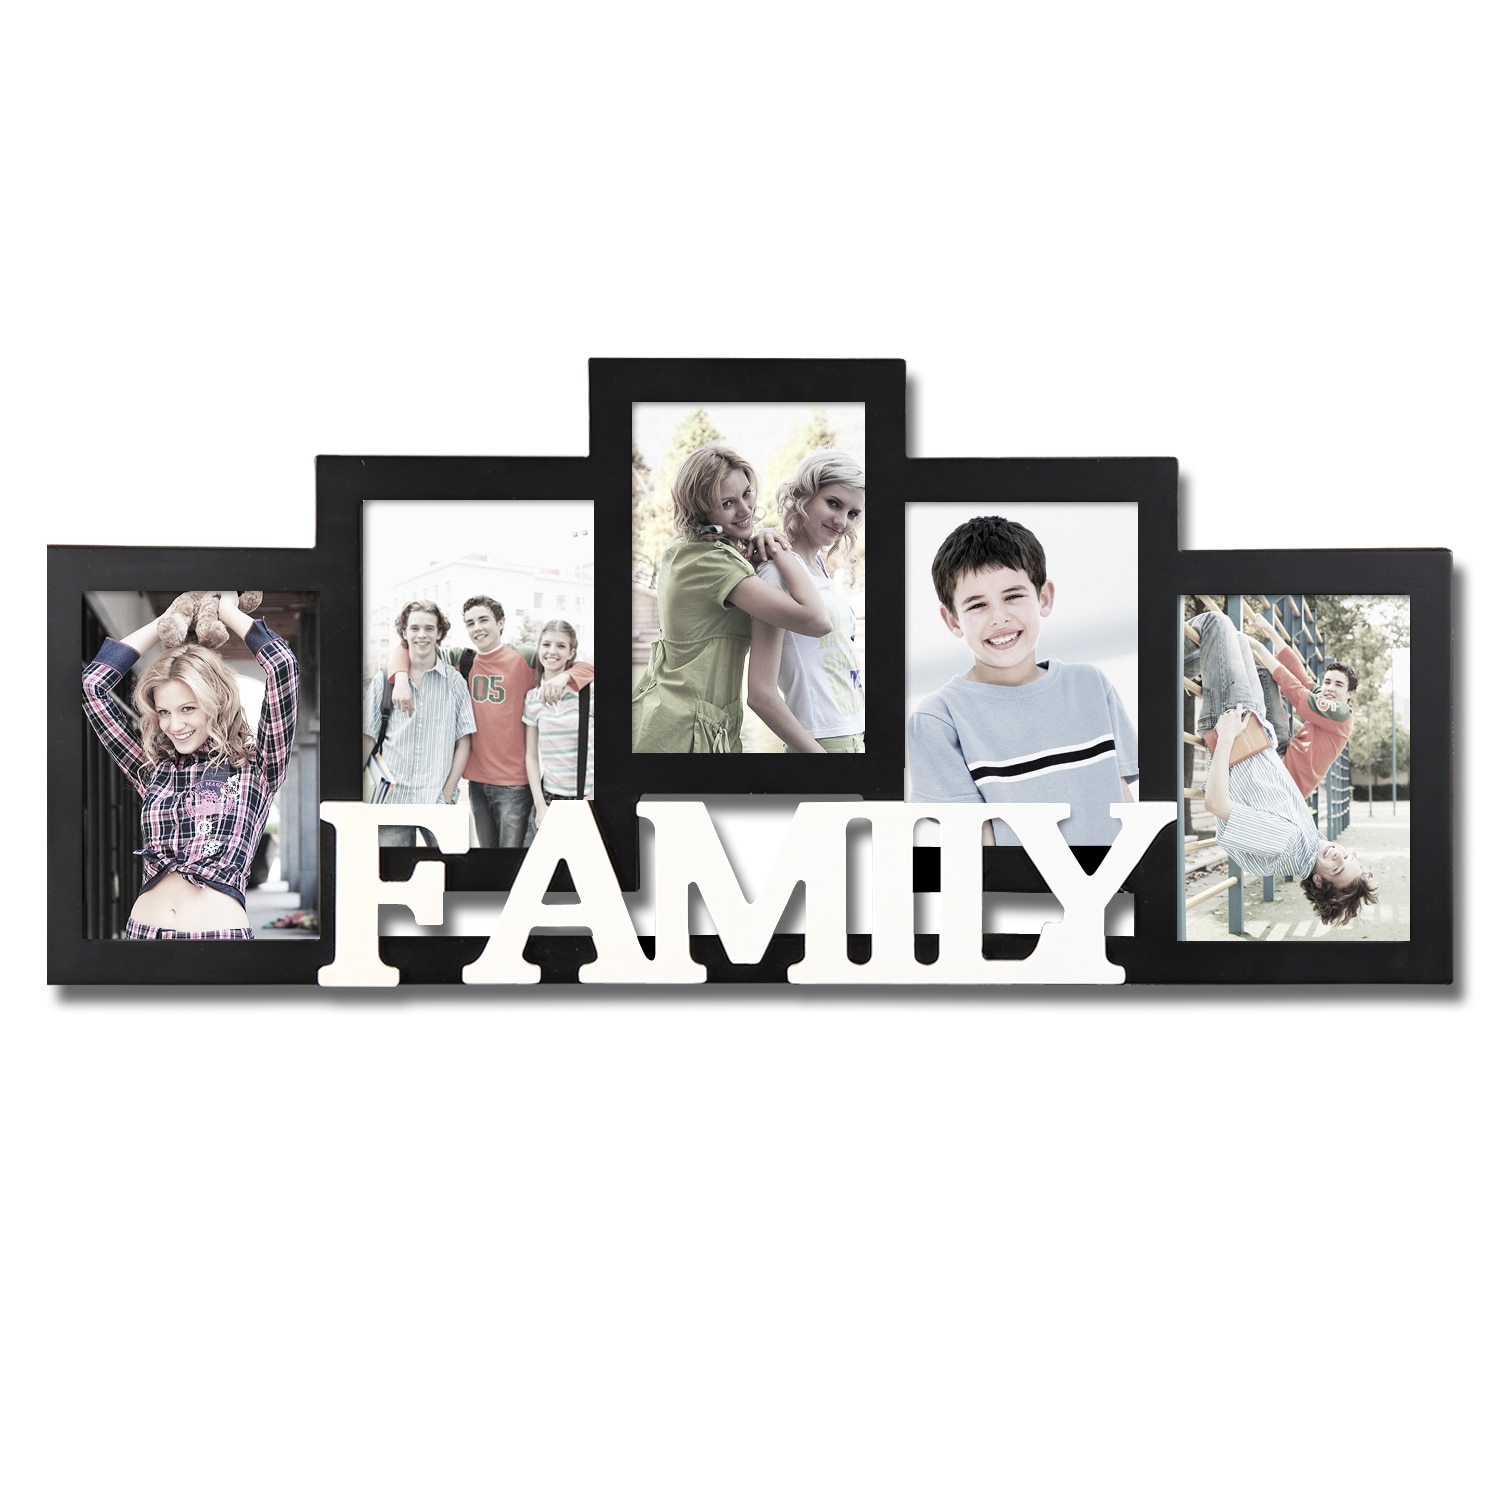 https://ak1.ostkcdn.com/images/products/9064251/Adeco-5-photo-Black-Wood-Family-Collage-Picture-Frame-L16258145.jpg